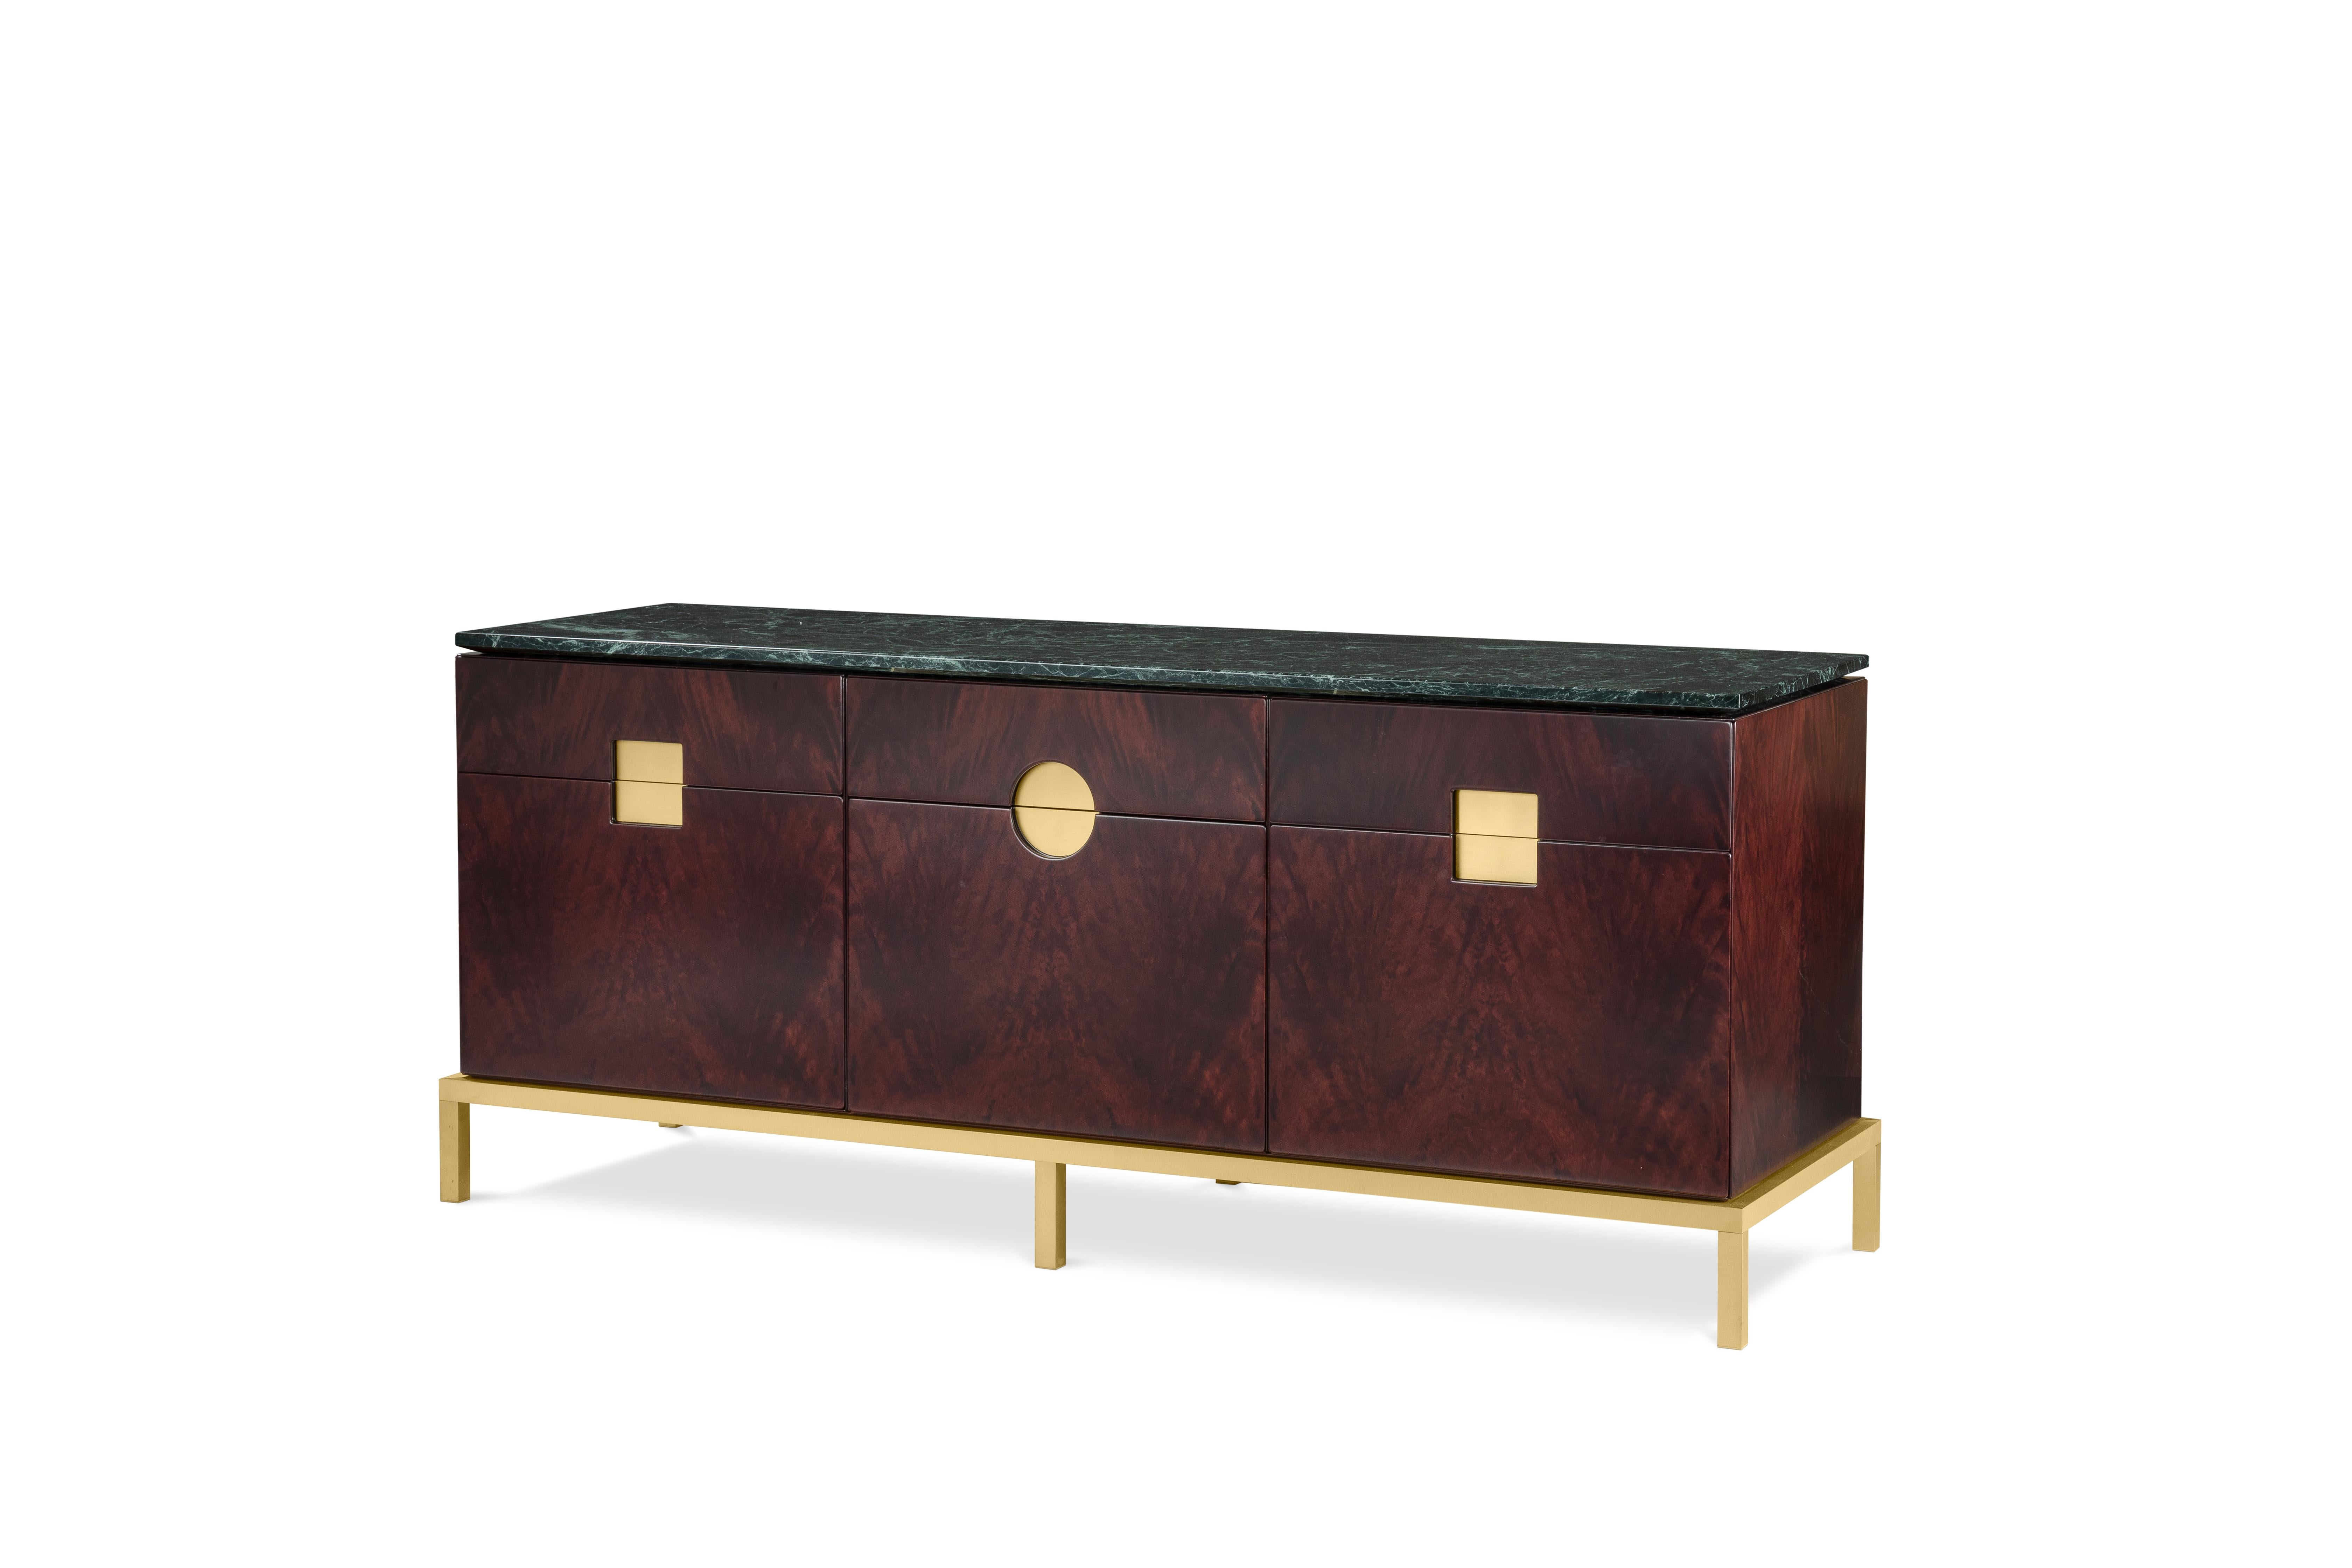 Elegant cabinet with essential lines of Japanese flavor. The slender structure in essence is opposed by four slim legs in gilded metal. Zuan is recognizable by the detail of the support, a quarter of a circle with great aesthetic and functionality,